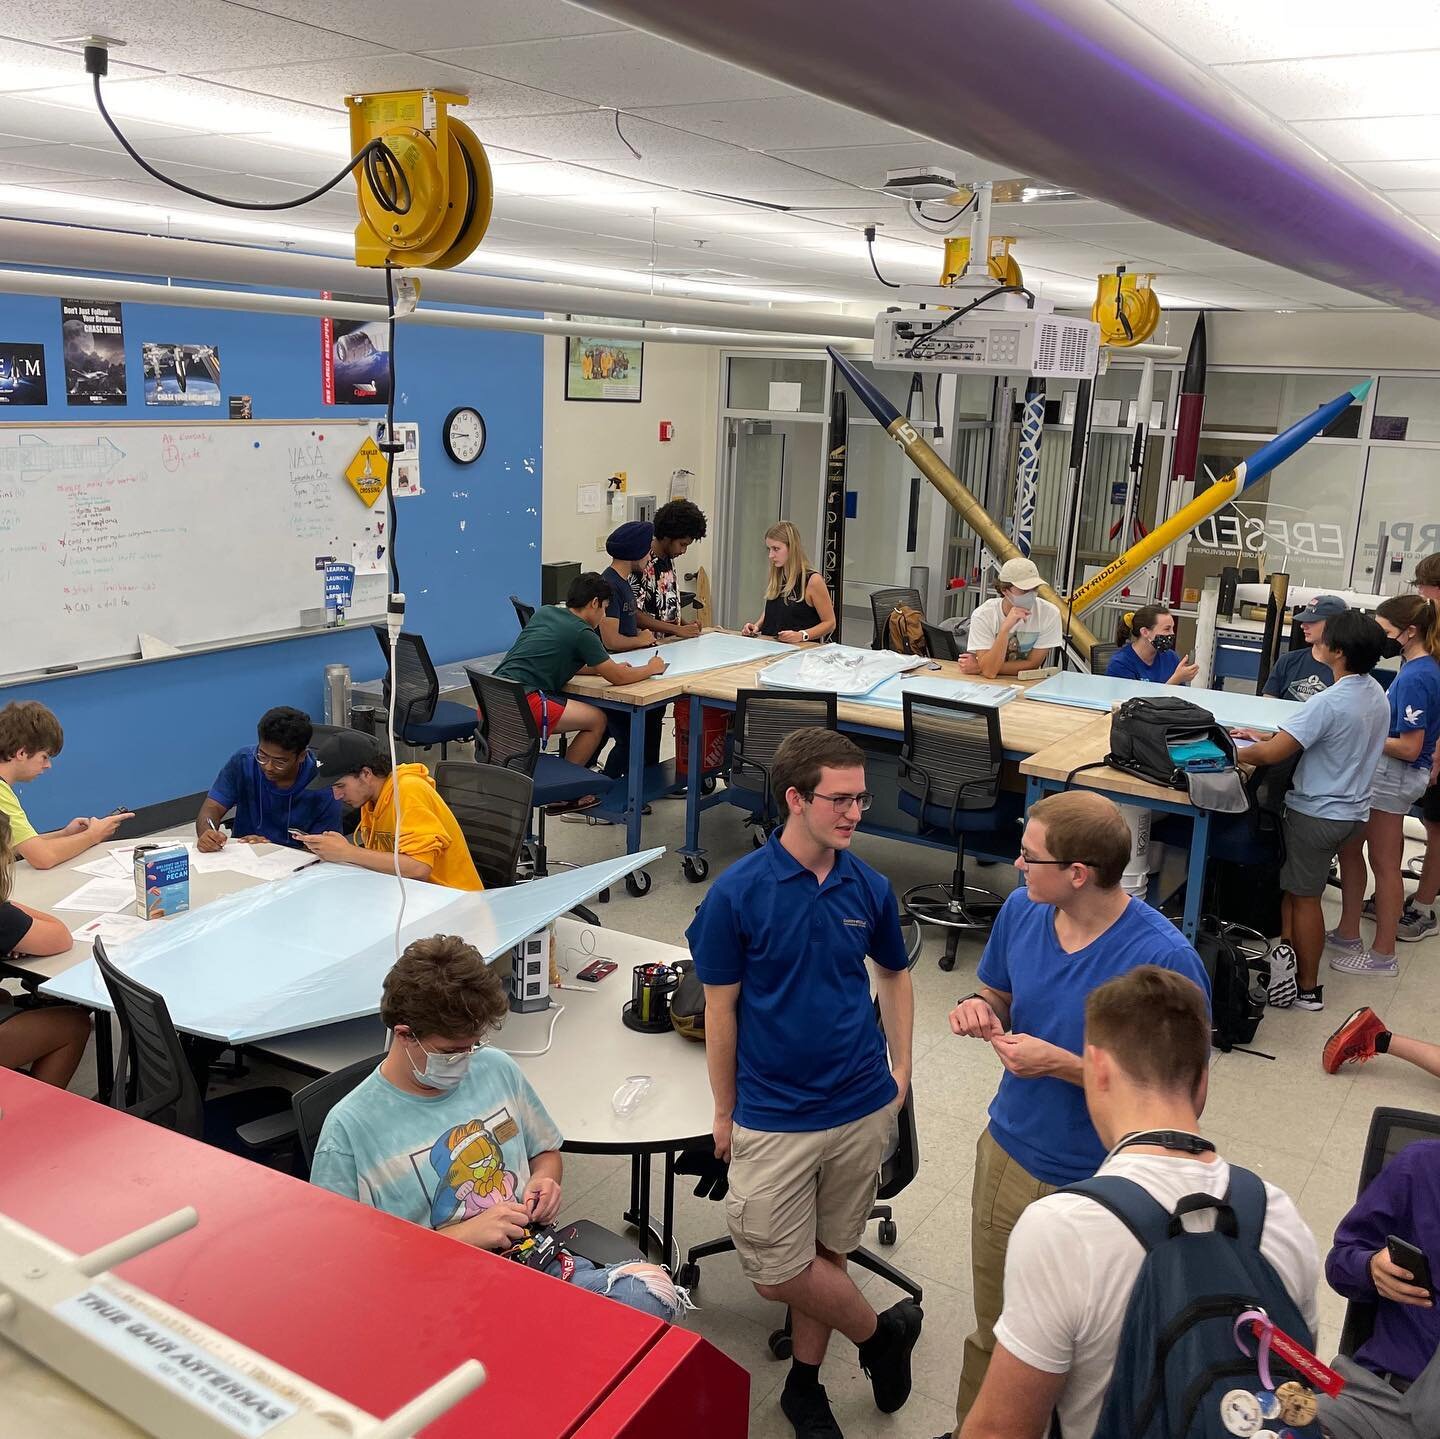 Last nights Pathfinder meeting had a big turn out with all hands on deck! The team continued work, and started working on our new &ldquo;Trailblazer&rdquo; rocket. This included making some molds for fins and a nose cone, while other members made a c